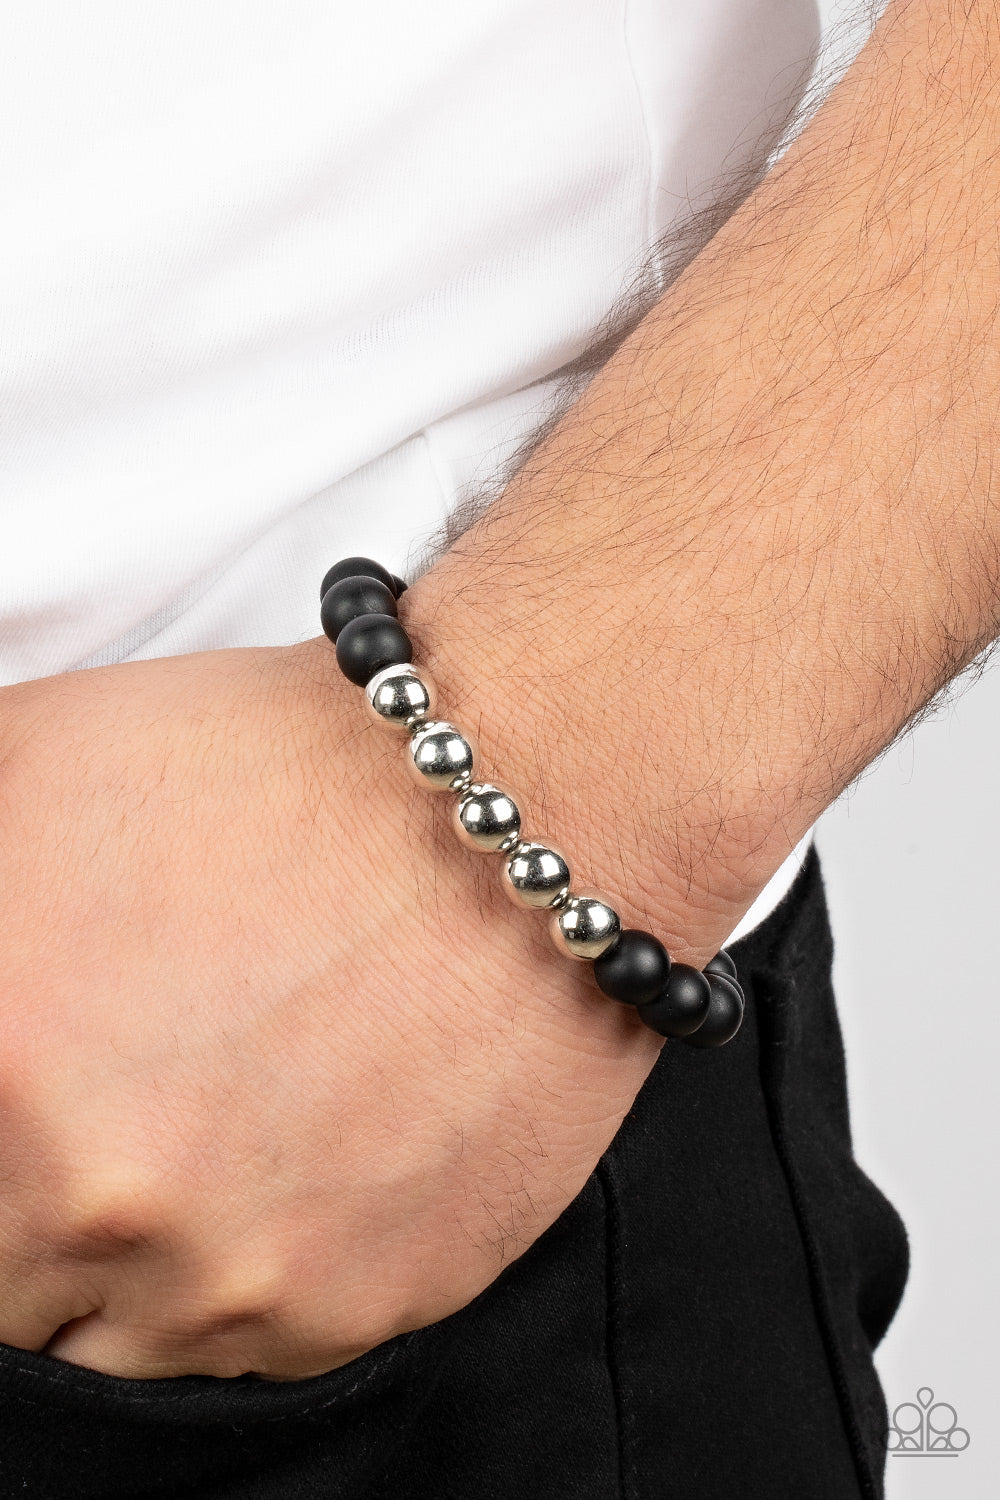 Paparazzi Accessories - METALHEAD in The Clouds - Black Bracelets a section of silver beads joins polished black stone beads along stretchy bands around the wrist, resulting in a metallic edge.  Sold as one individual bracelet.